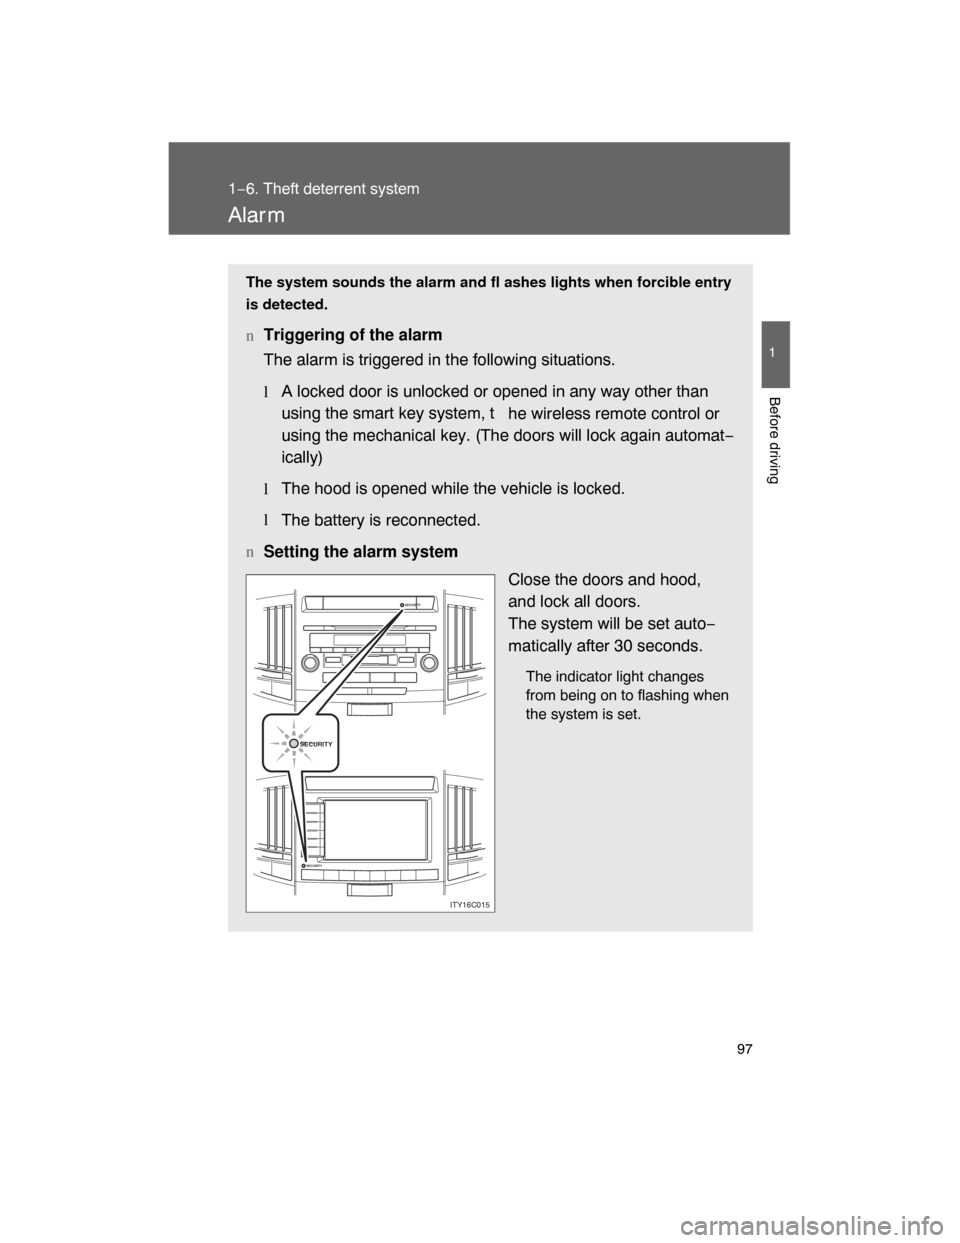 TOYOTA LAND CRUISER 2008 J200 Owners Manual 97
1
1−6. Theft deterrent system
Before driving
Alar m
The system sounds the alarm and fl ashes lights when forcible entry
is detected.
nTriggering of the alarm
The alarm is triggered in the followi